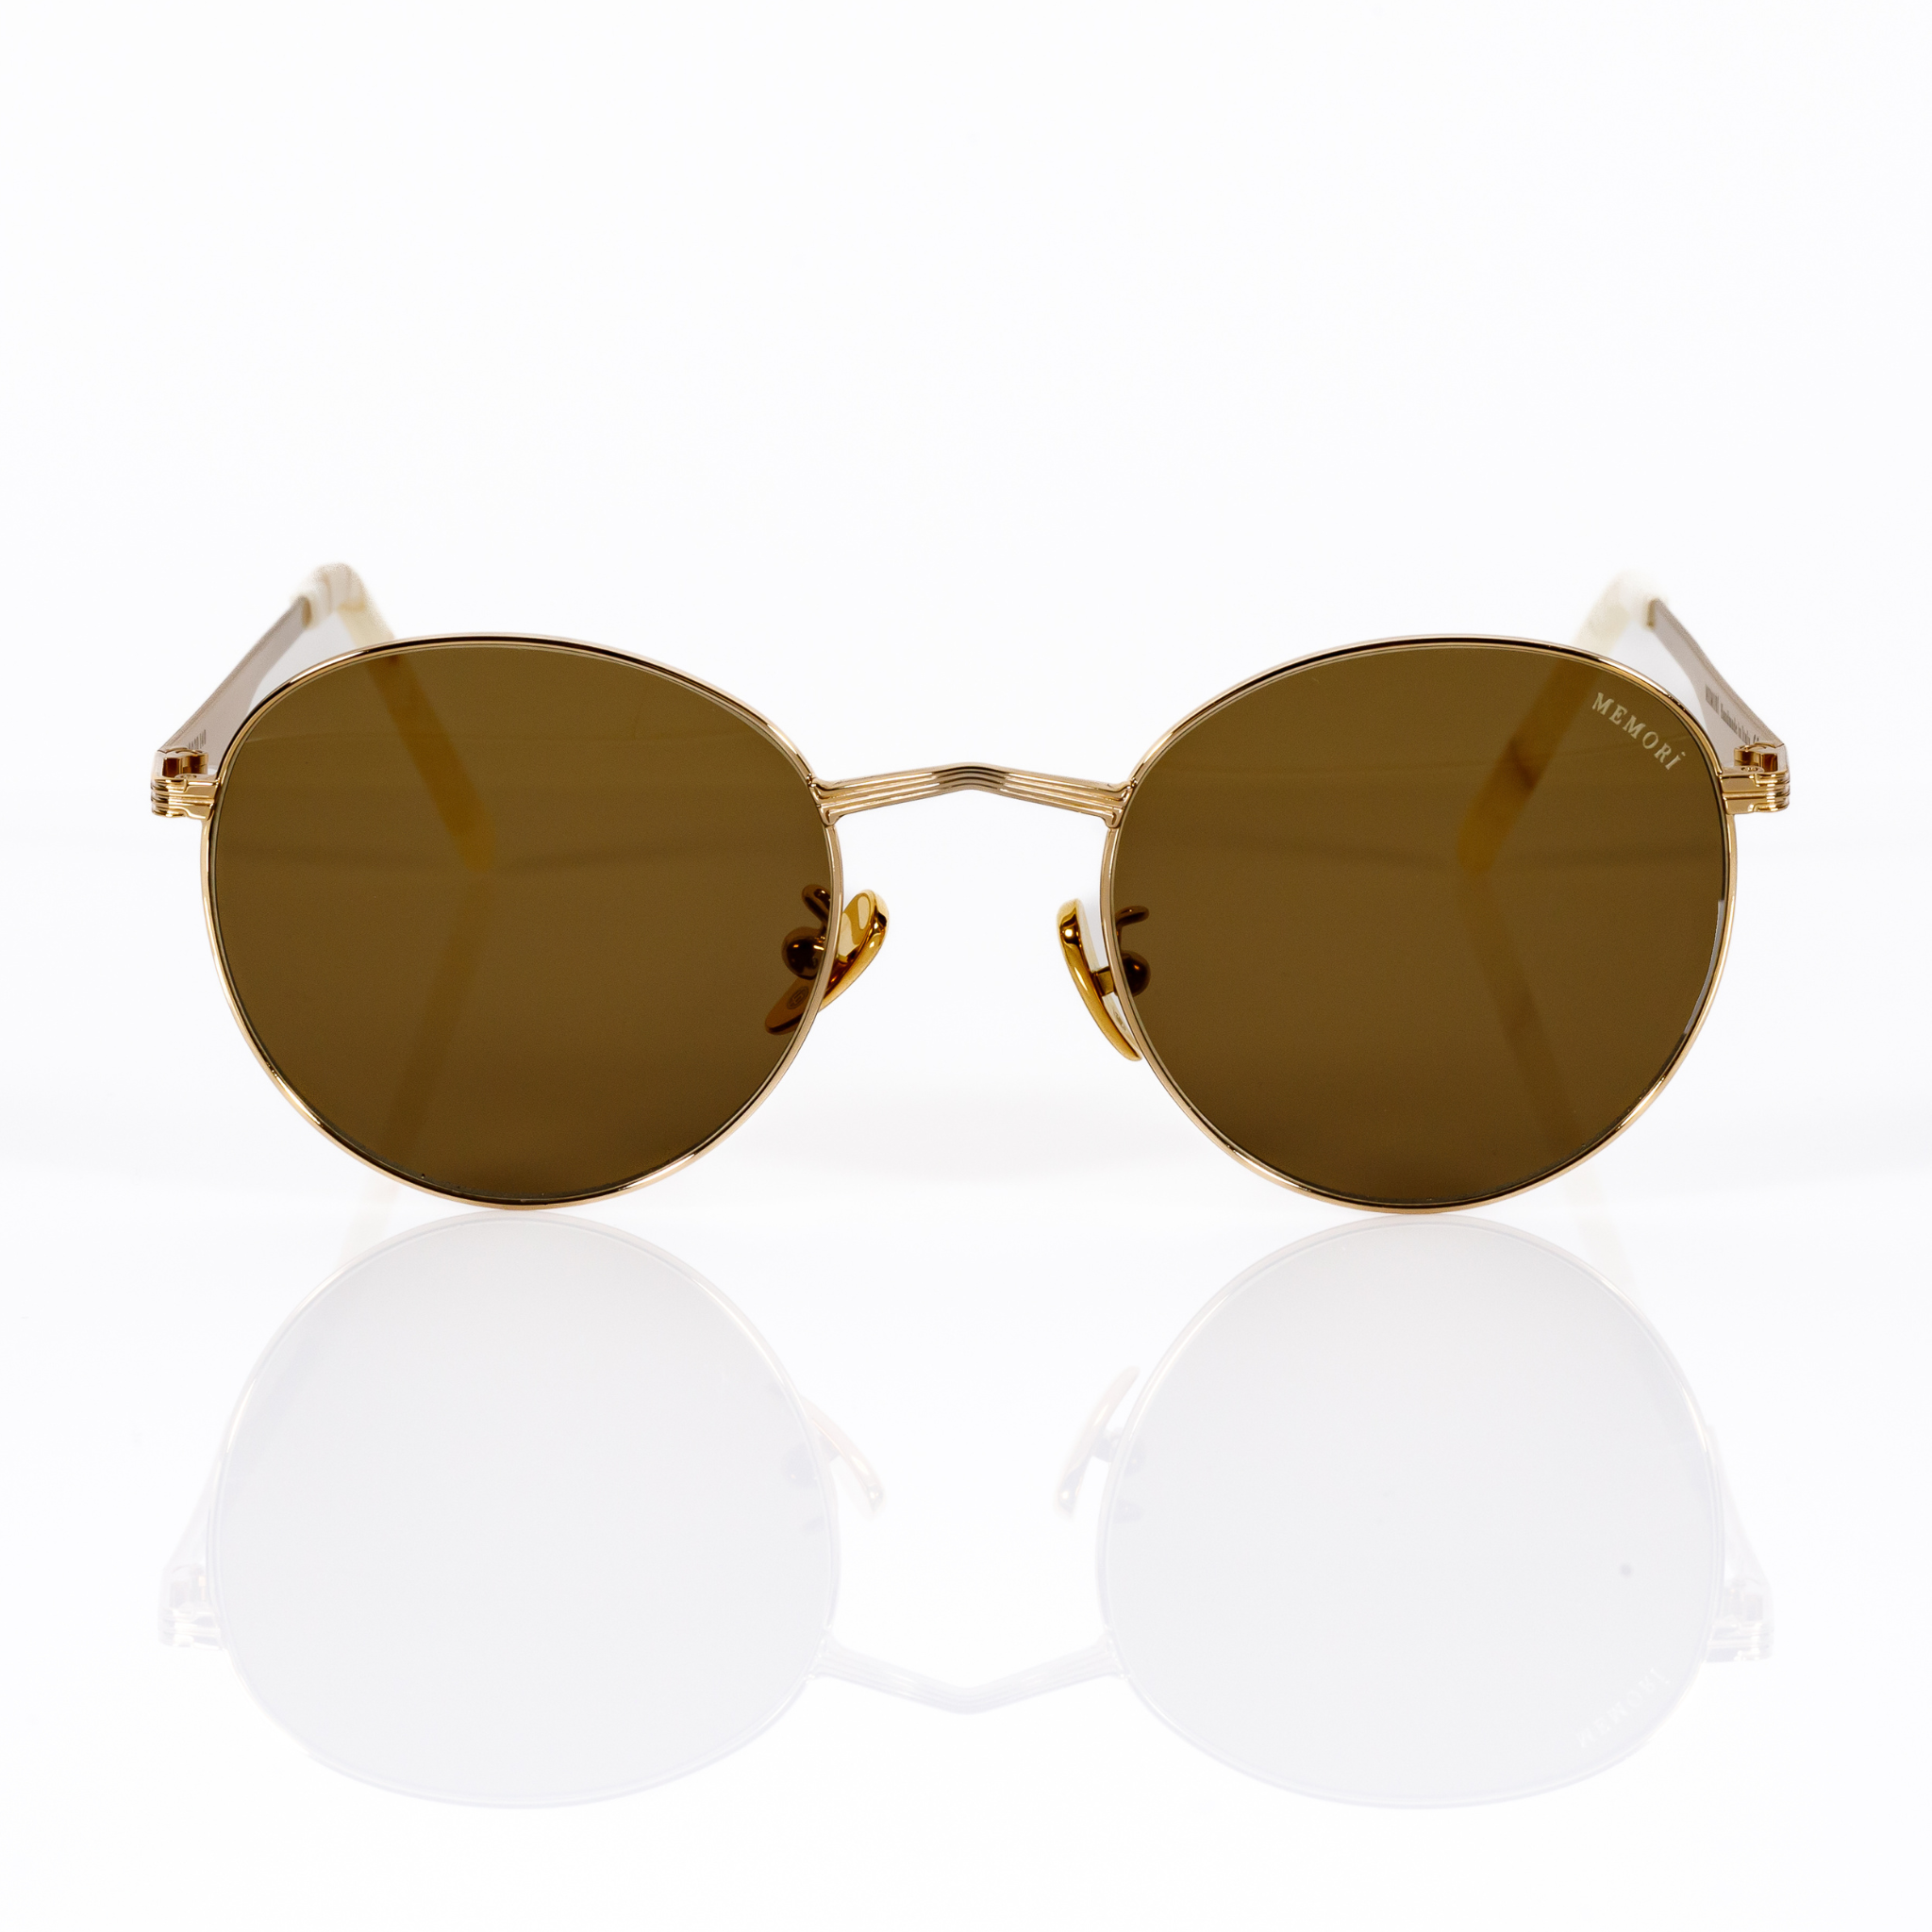 Gold frame Memorí sunglasses with warm brown lenses, forward view. The best sunglasses for small faces, these feature an angular V shaped nose bridge, gold ceramic nose pads, and the Memorí logo in the upper corner of the lens. 